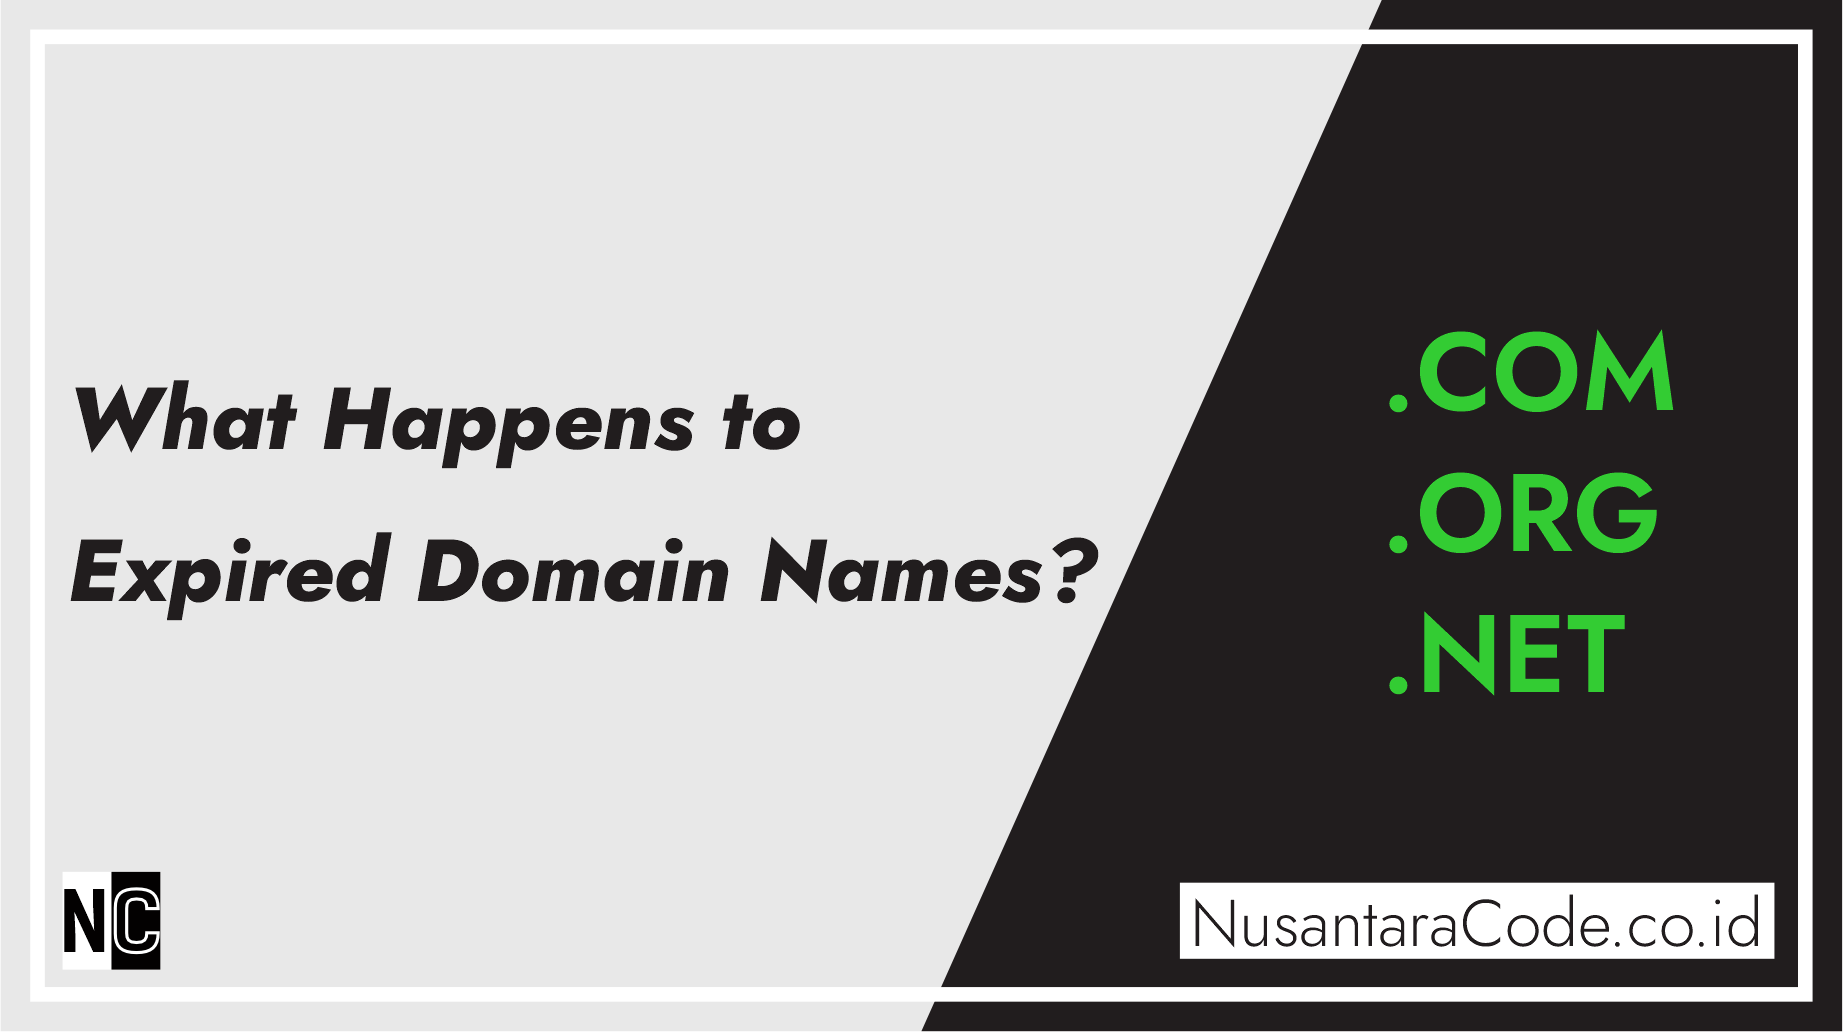 What Happens to Expired Domain Names?